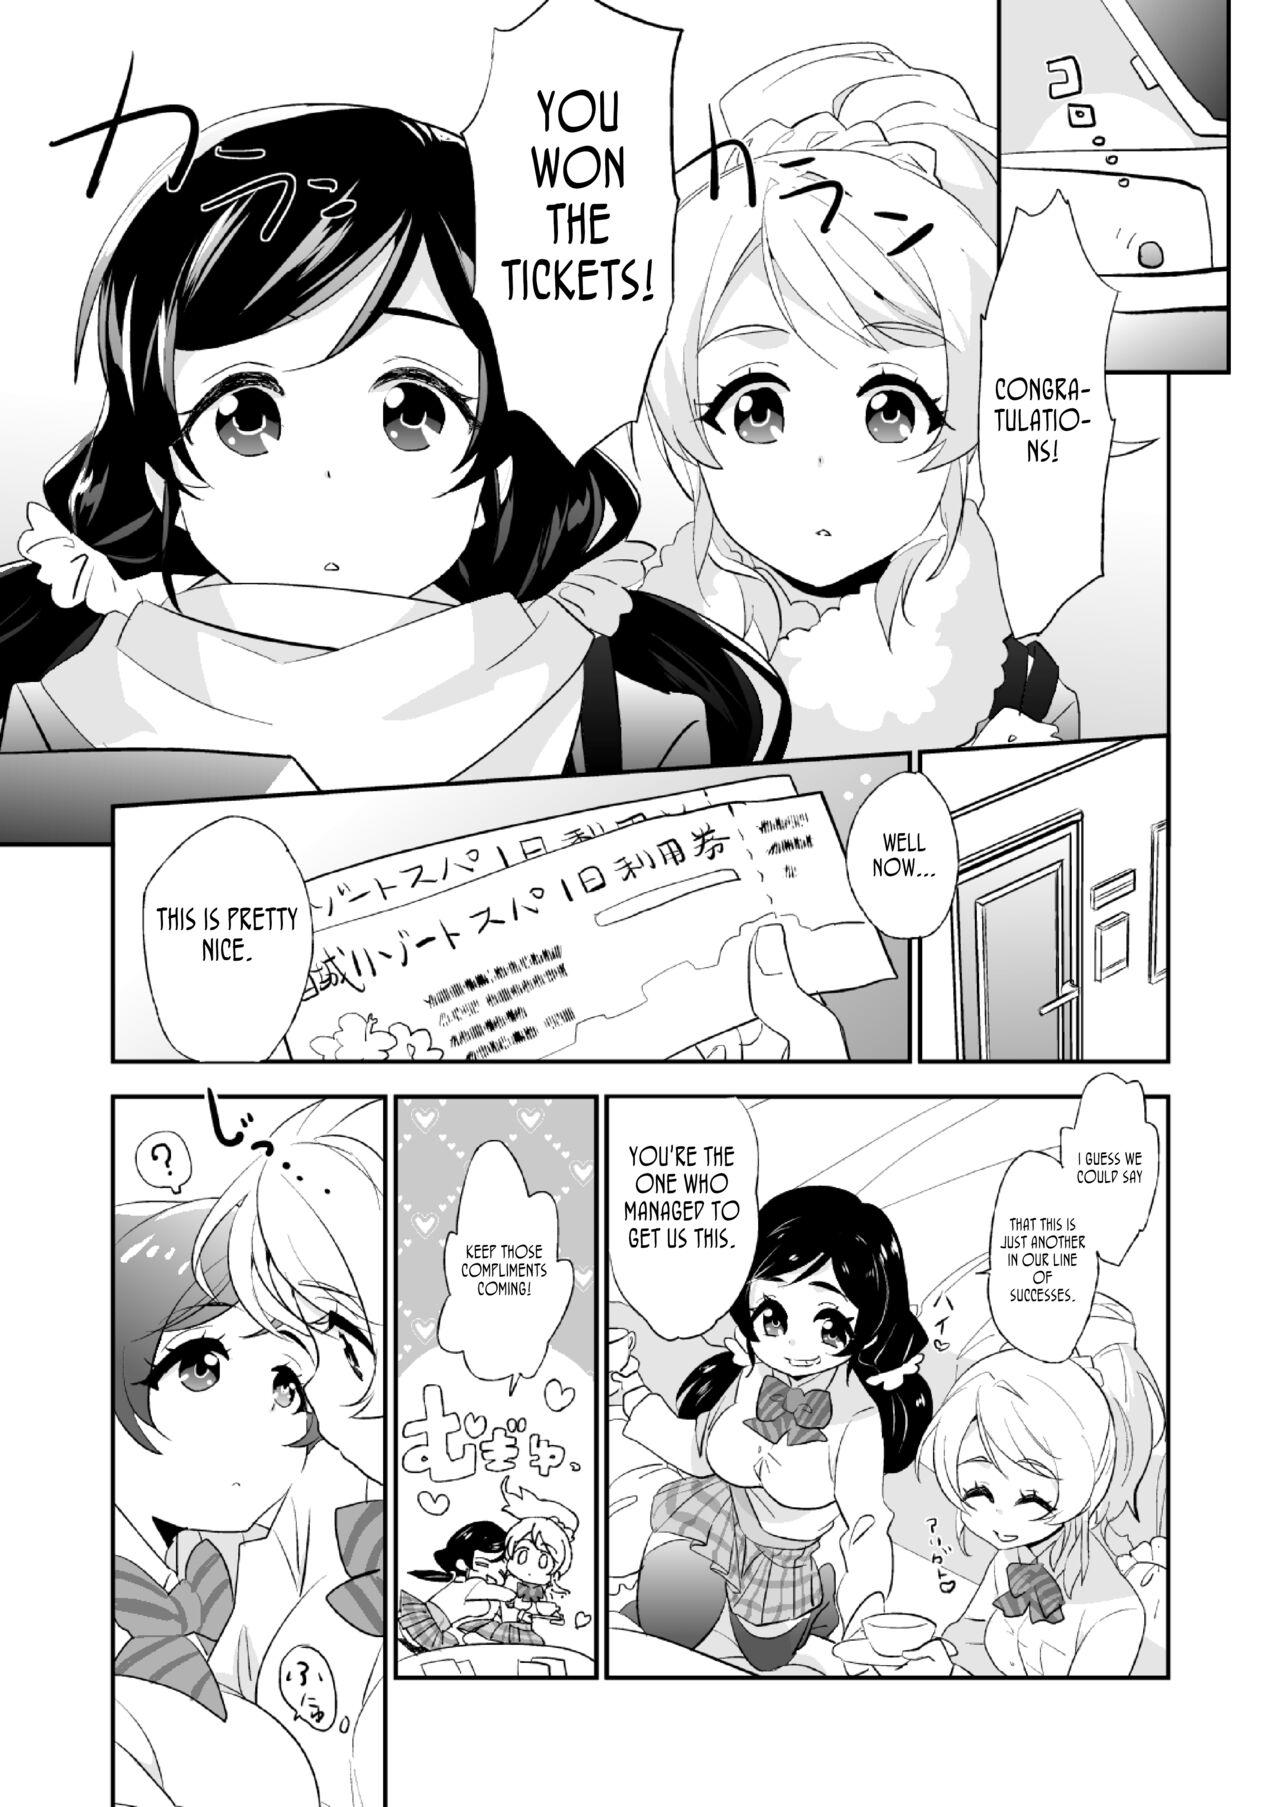 Doggystyle Luminous - Love live Humiliation - Page 3